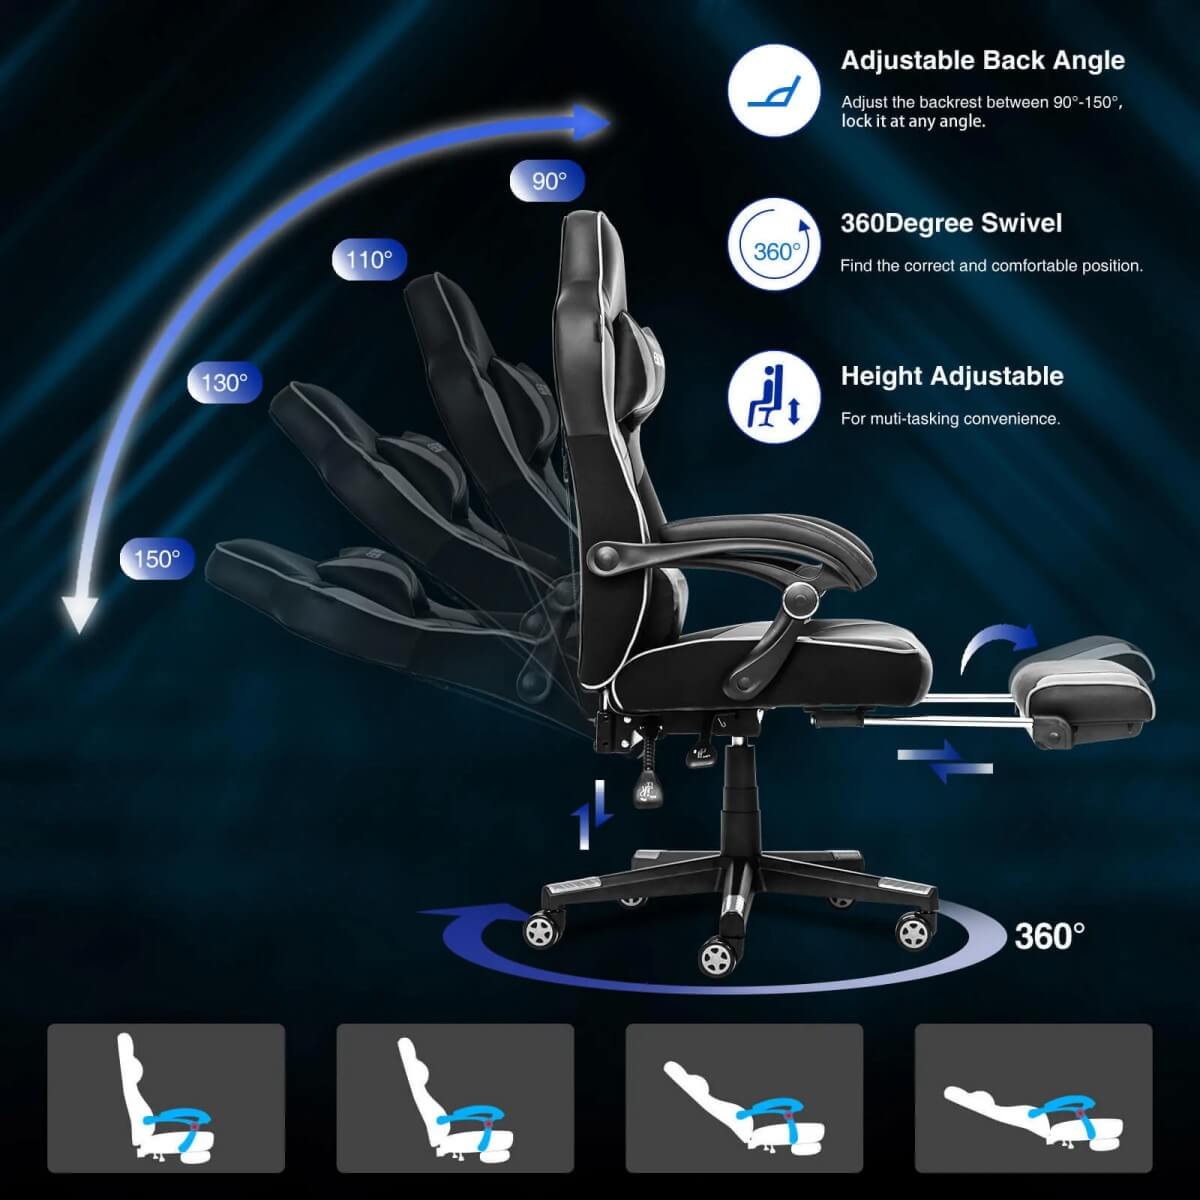 Elecwish Video Game Chairs White Gaming Chair With Footrest OC087 can adjustback angle, height and have 360 degree swivel